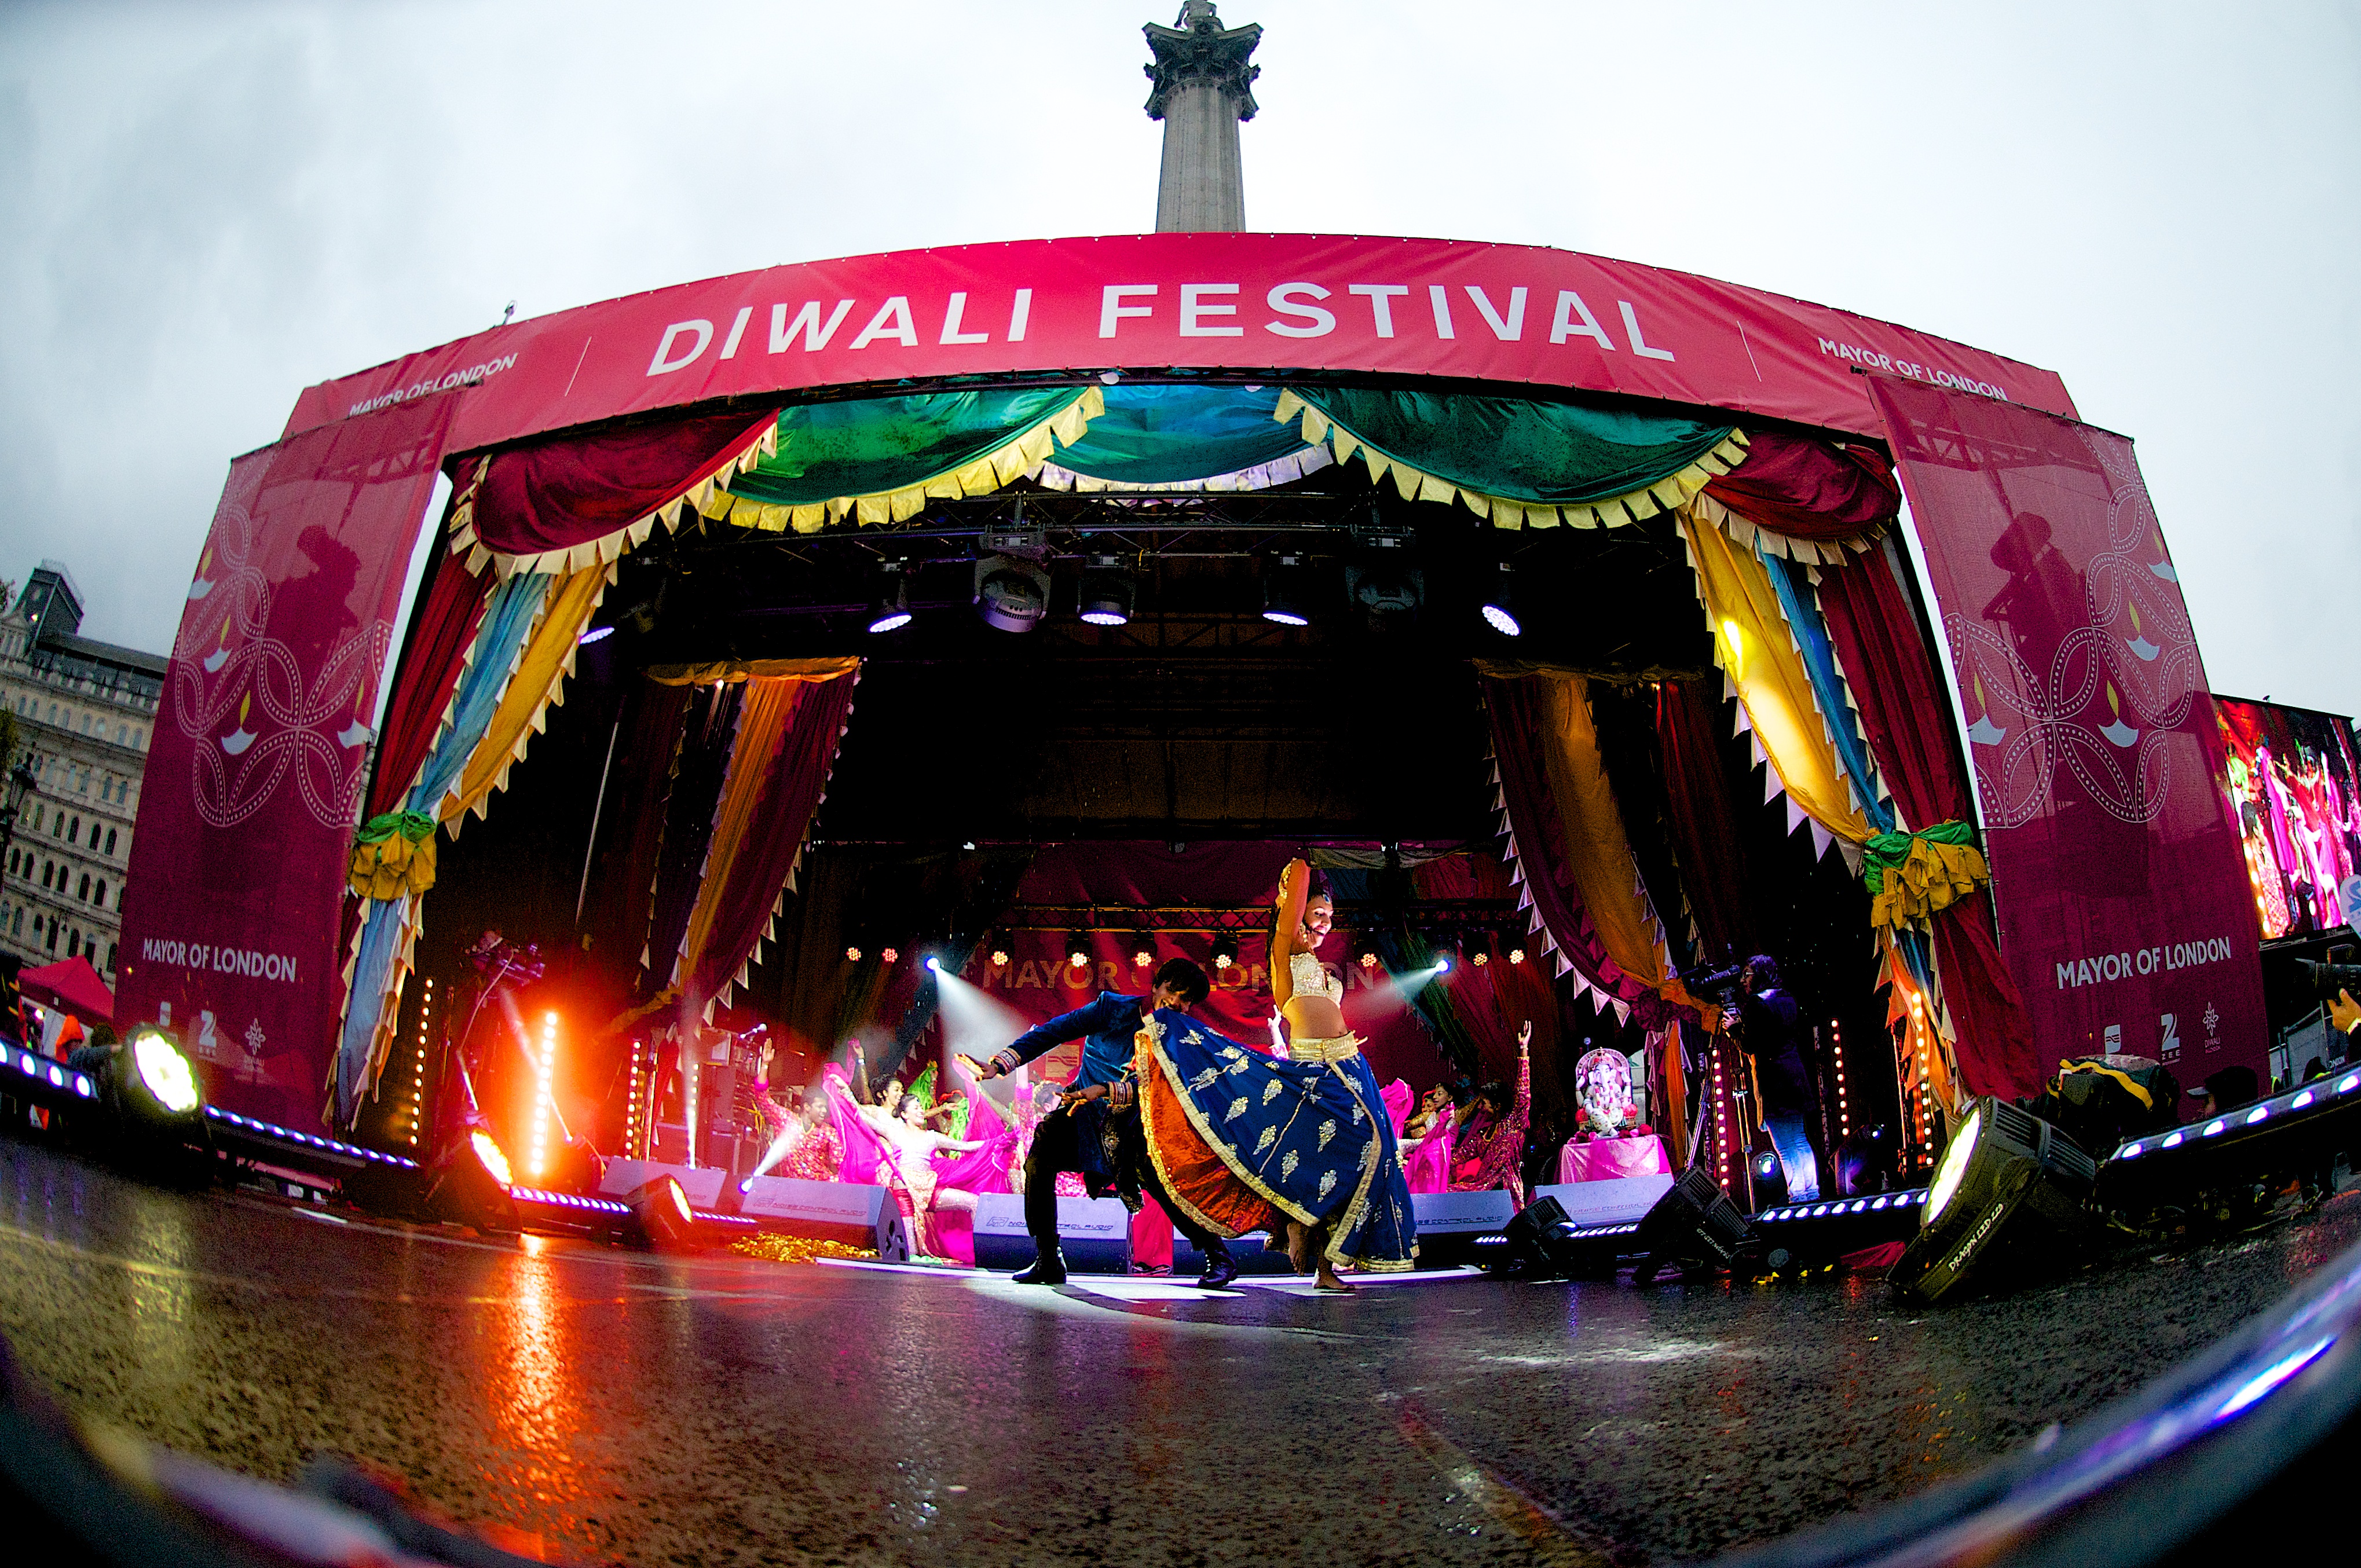 A general view as dancers perform onstage at the Diwali celebrations in Trafalgar Square on 12.10.14